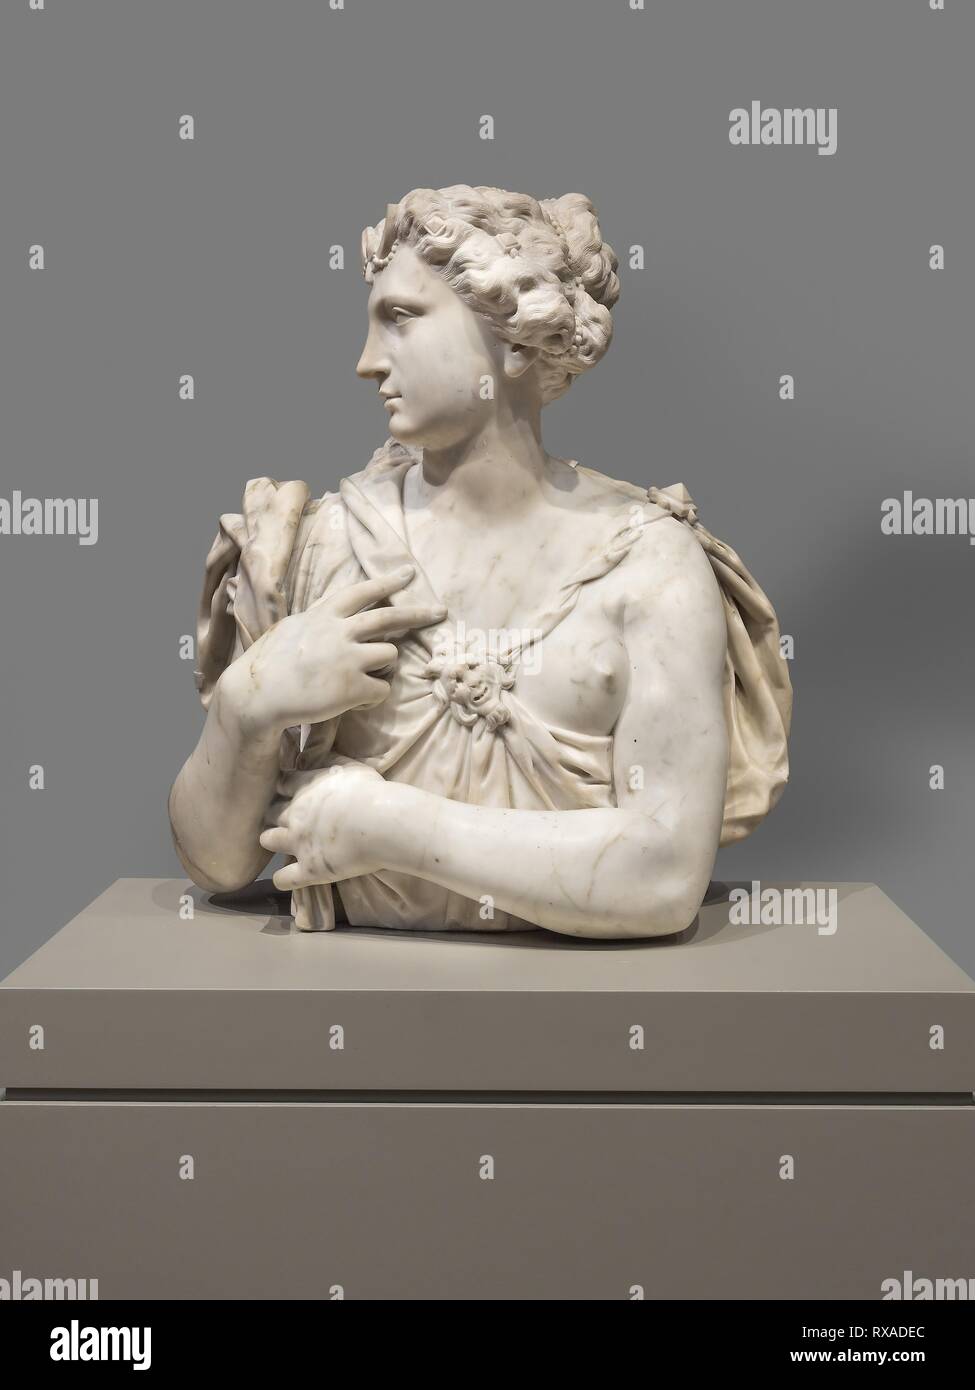 Bust of Diana. Giuseppe Mazza; Italian, 1653--1741. Date: 1653-1741.  Dimensions: 67.9 × 59.1 × 27.9 cm (26 3/4 × 23 1/4 × 11 in.). Marble.  Origin: France. Museum: The Chicago Art Institute Stock Photo - Alamy